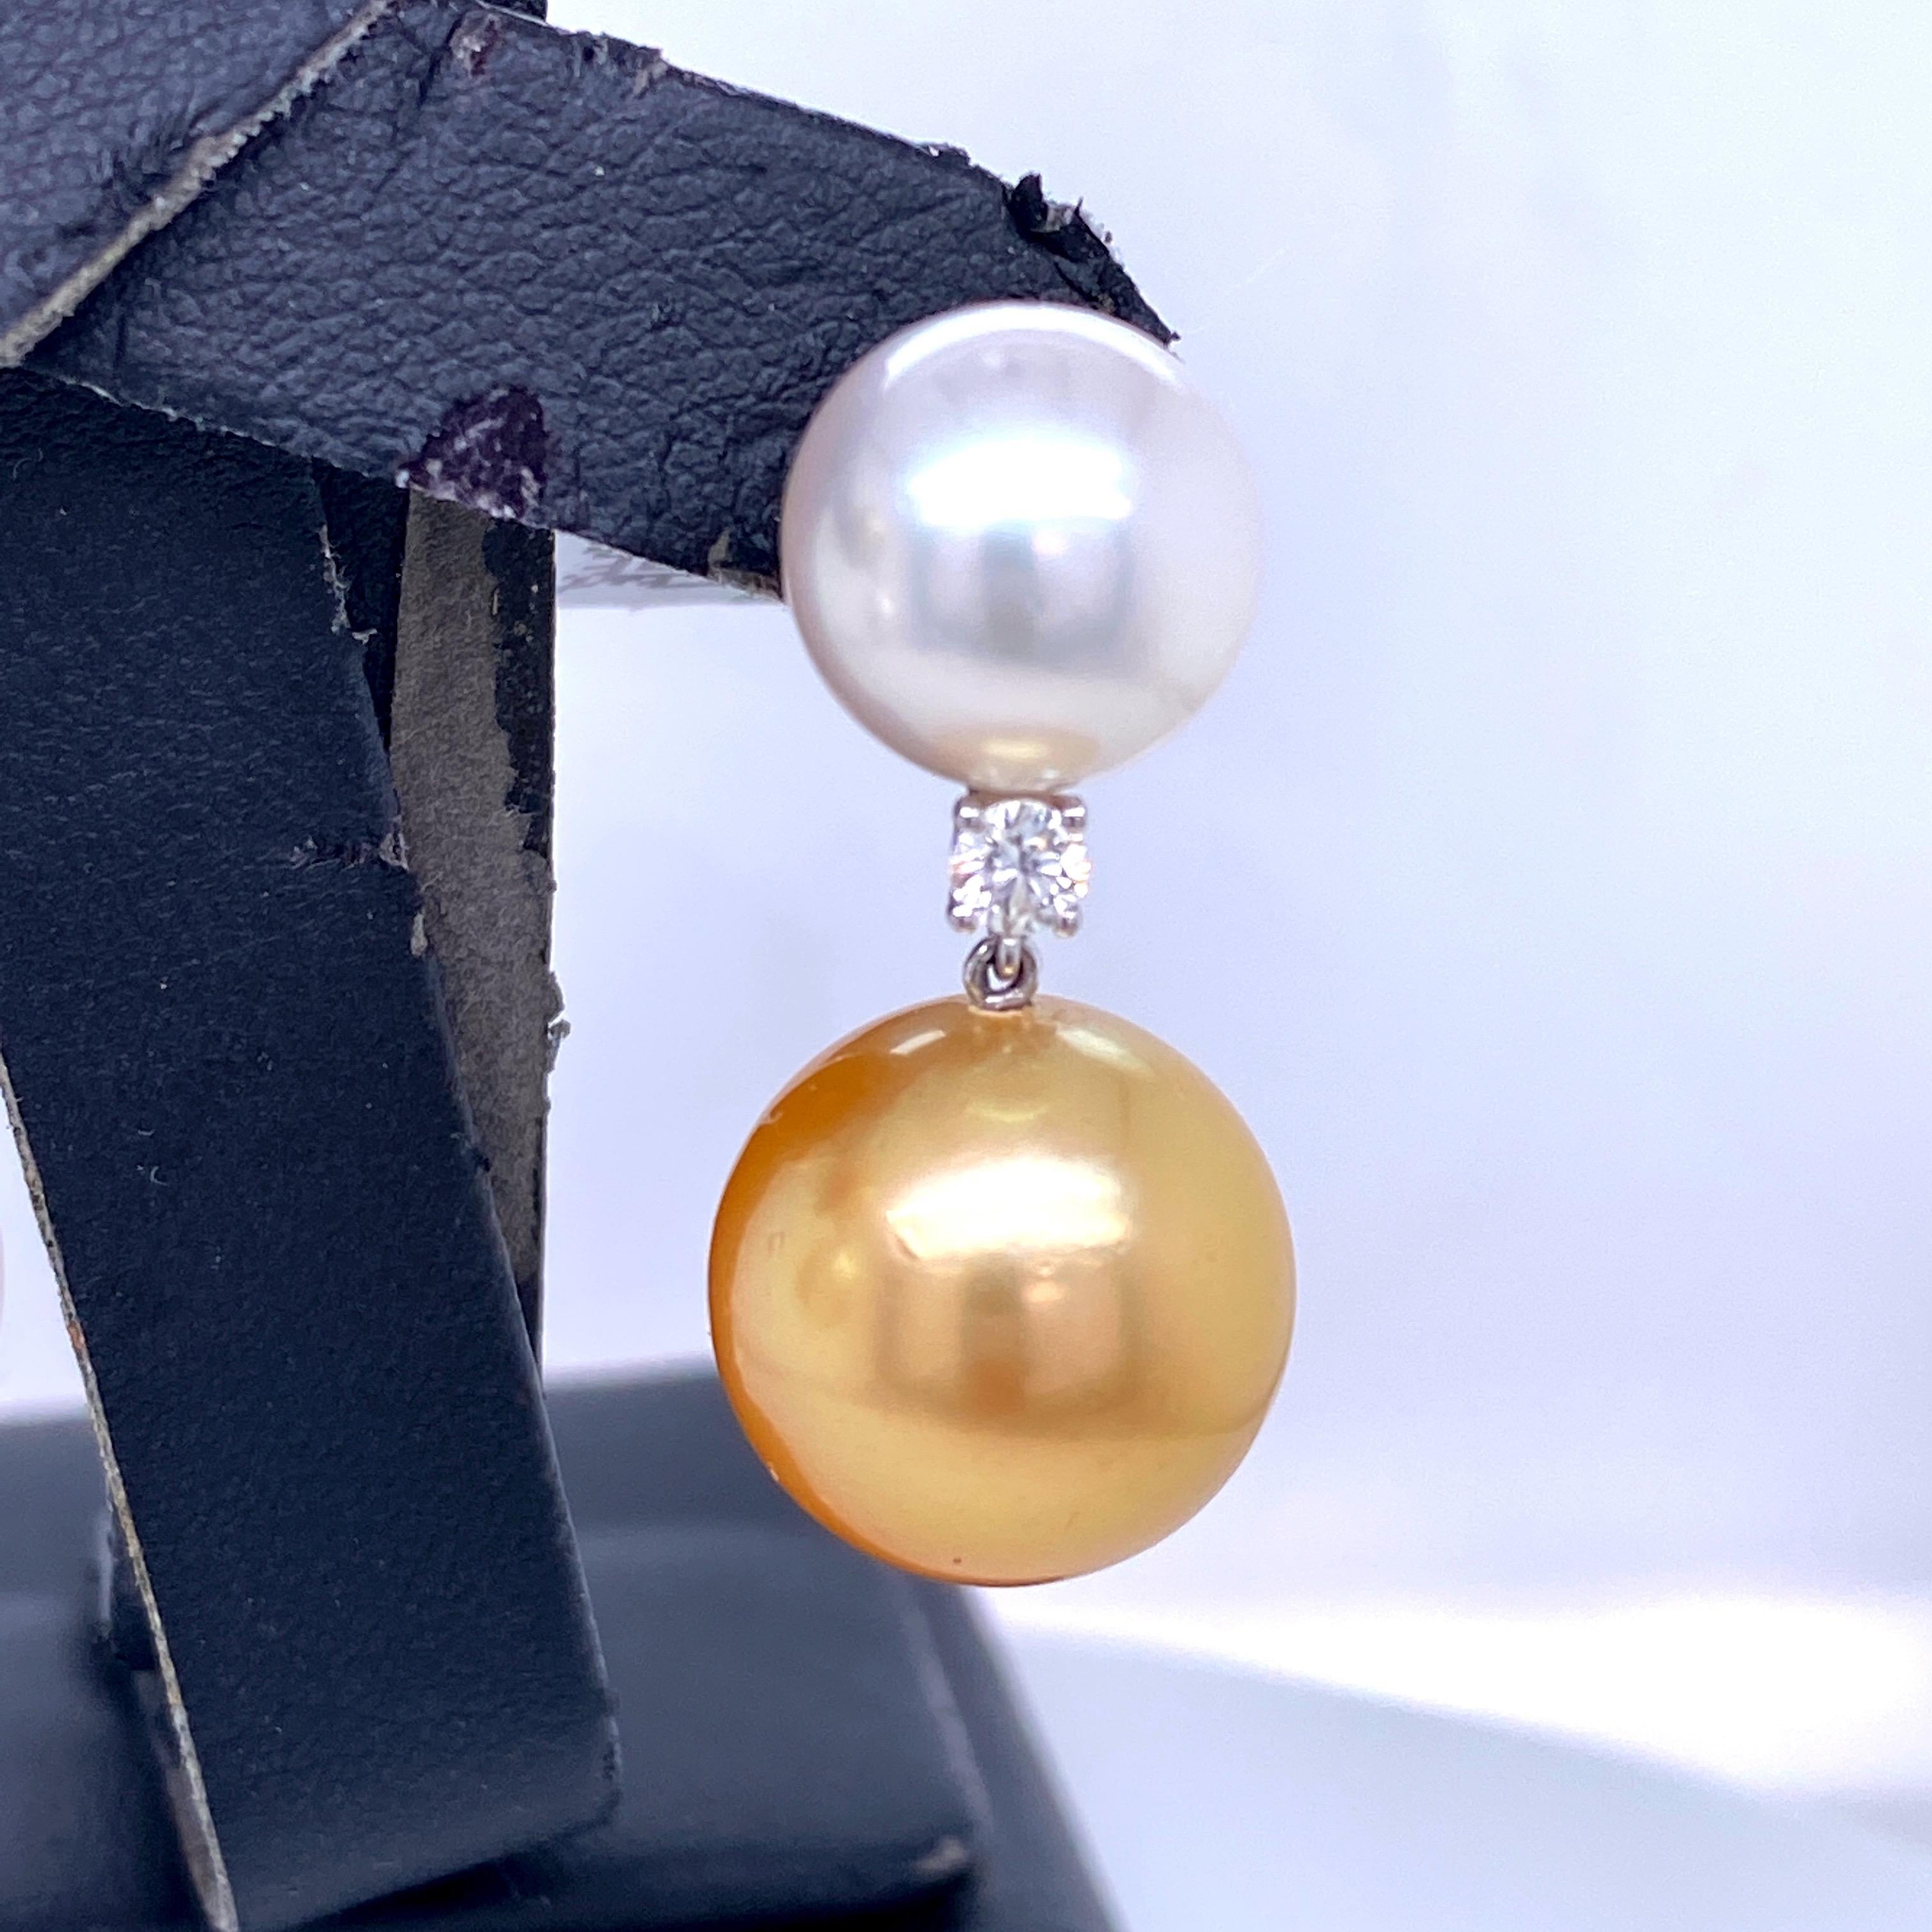 18K White gold drop earrings featuring two South Sea & Golden Pearls measuring 11-14 mm and 2 round brilliants 0.25 carats. Opposites Attract!
Color G-H
Clarity SI